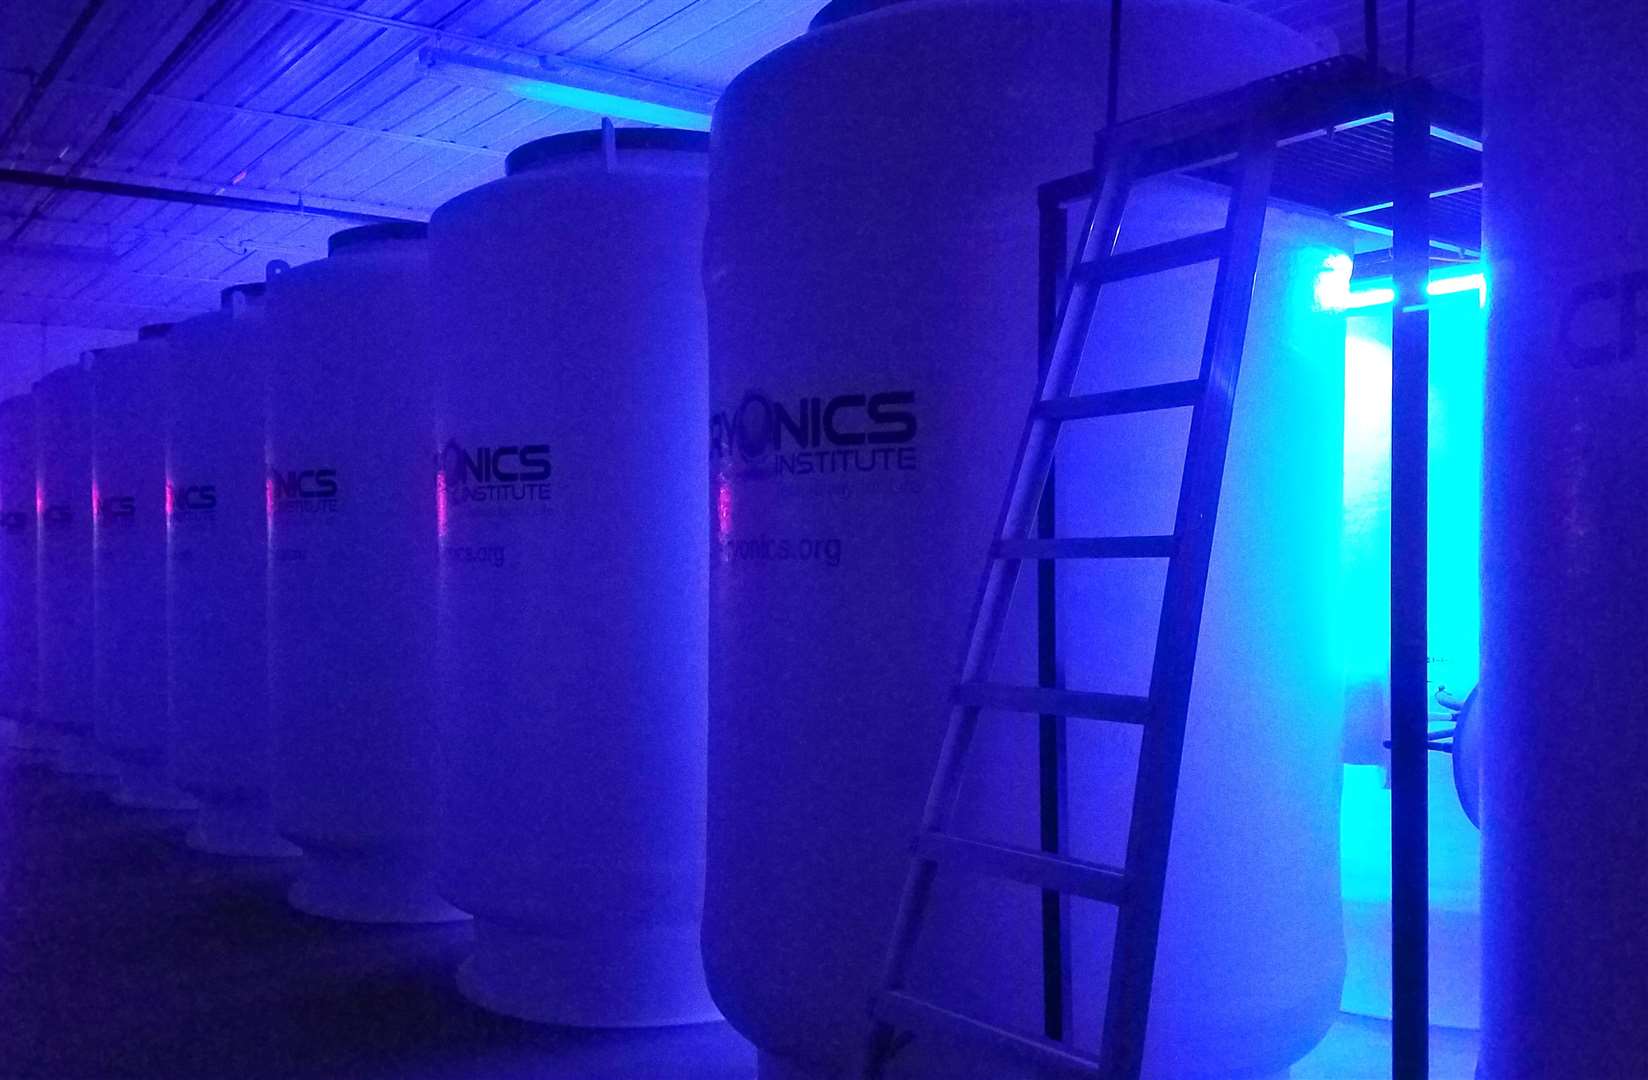 Fancy ending up here? The storage chambers at the Cryonics Institute in the US